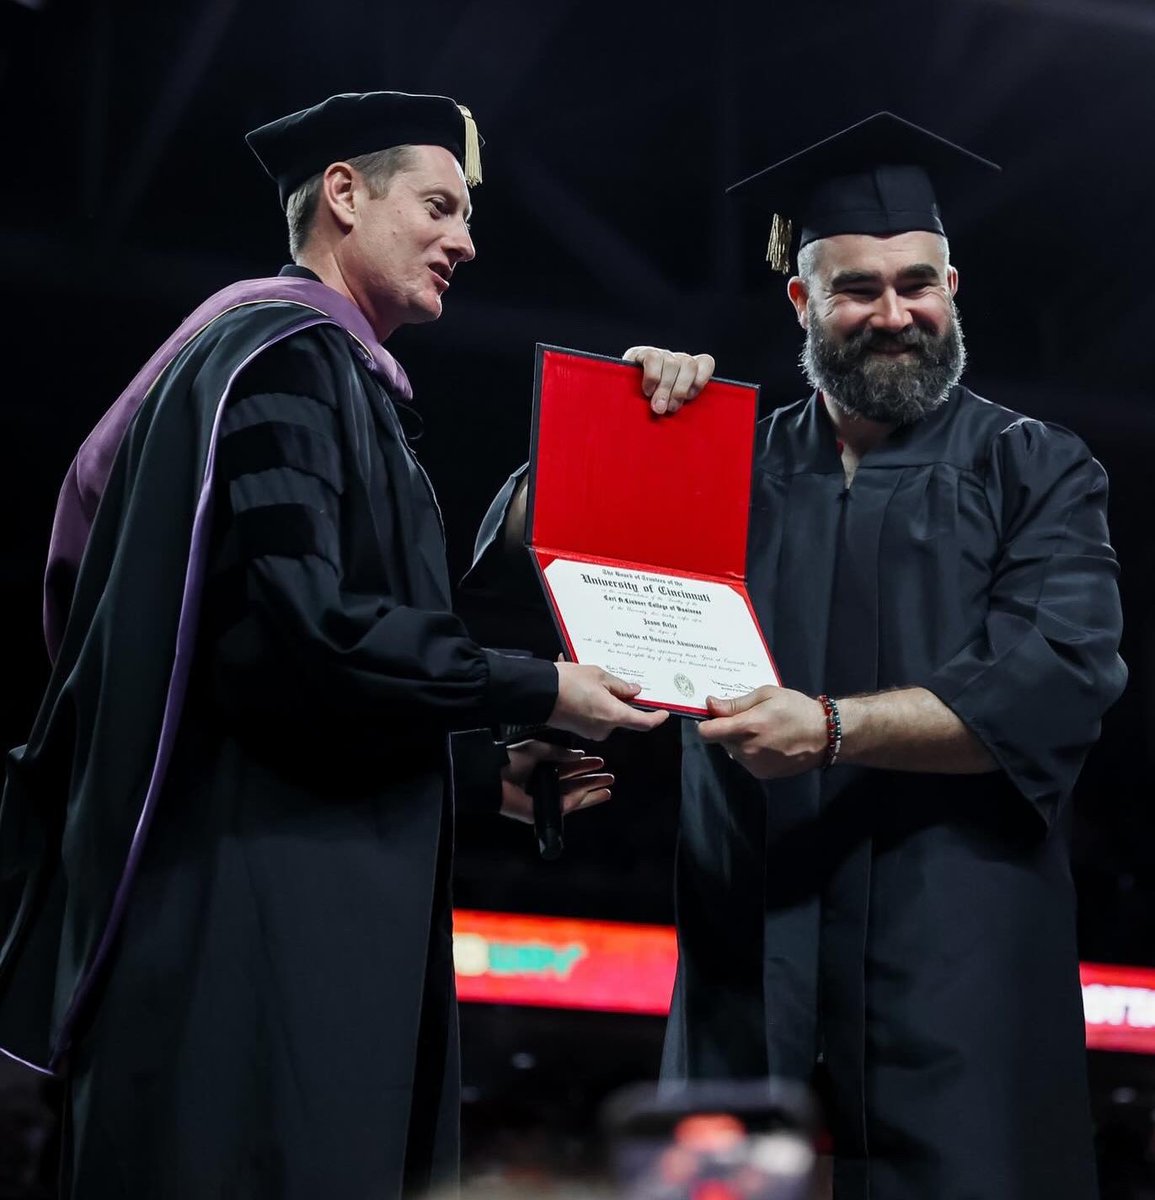 .@tkelce & @JasonKelce were surprised with a commencement ceremony at the University of Cincinnati 🎓🎉 (via @GoBEARCATS, @newheightshow)